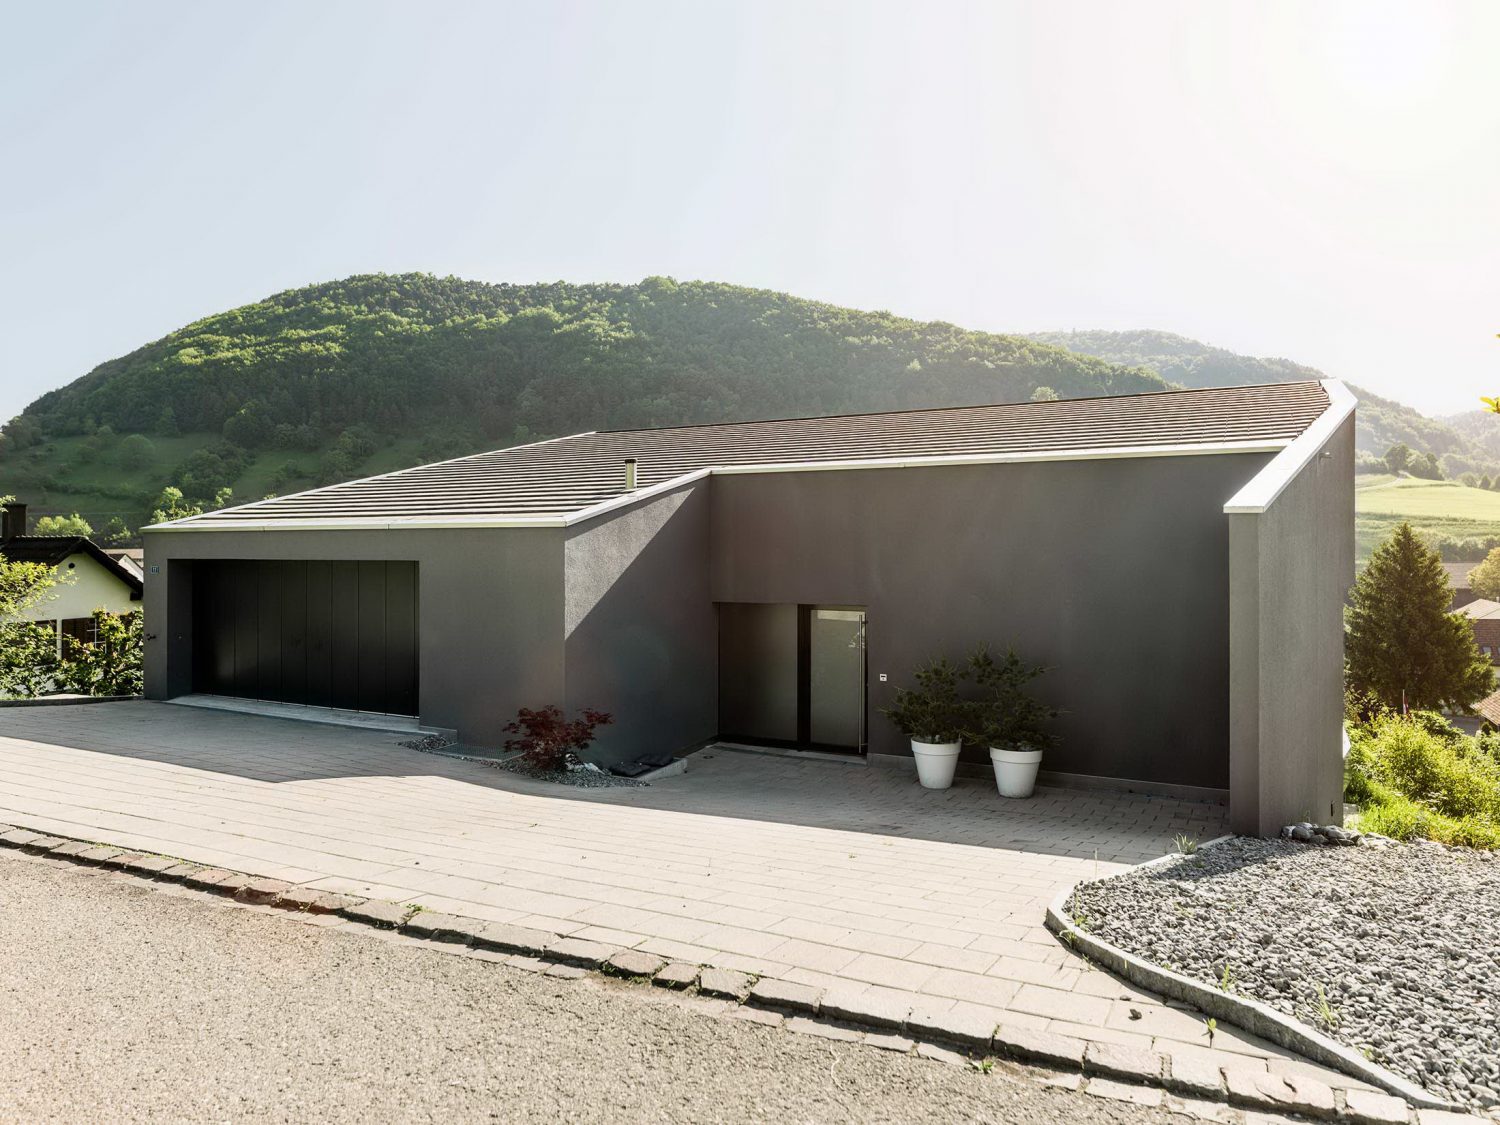 Single Family House on a Slope by Dost